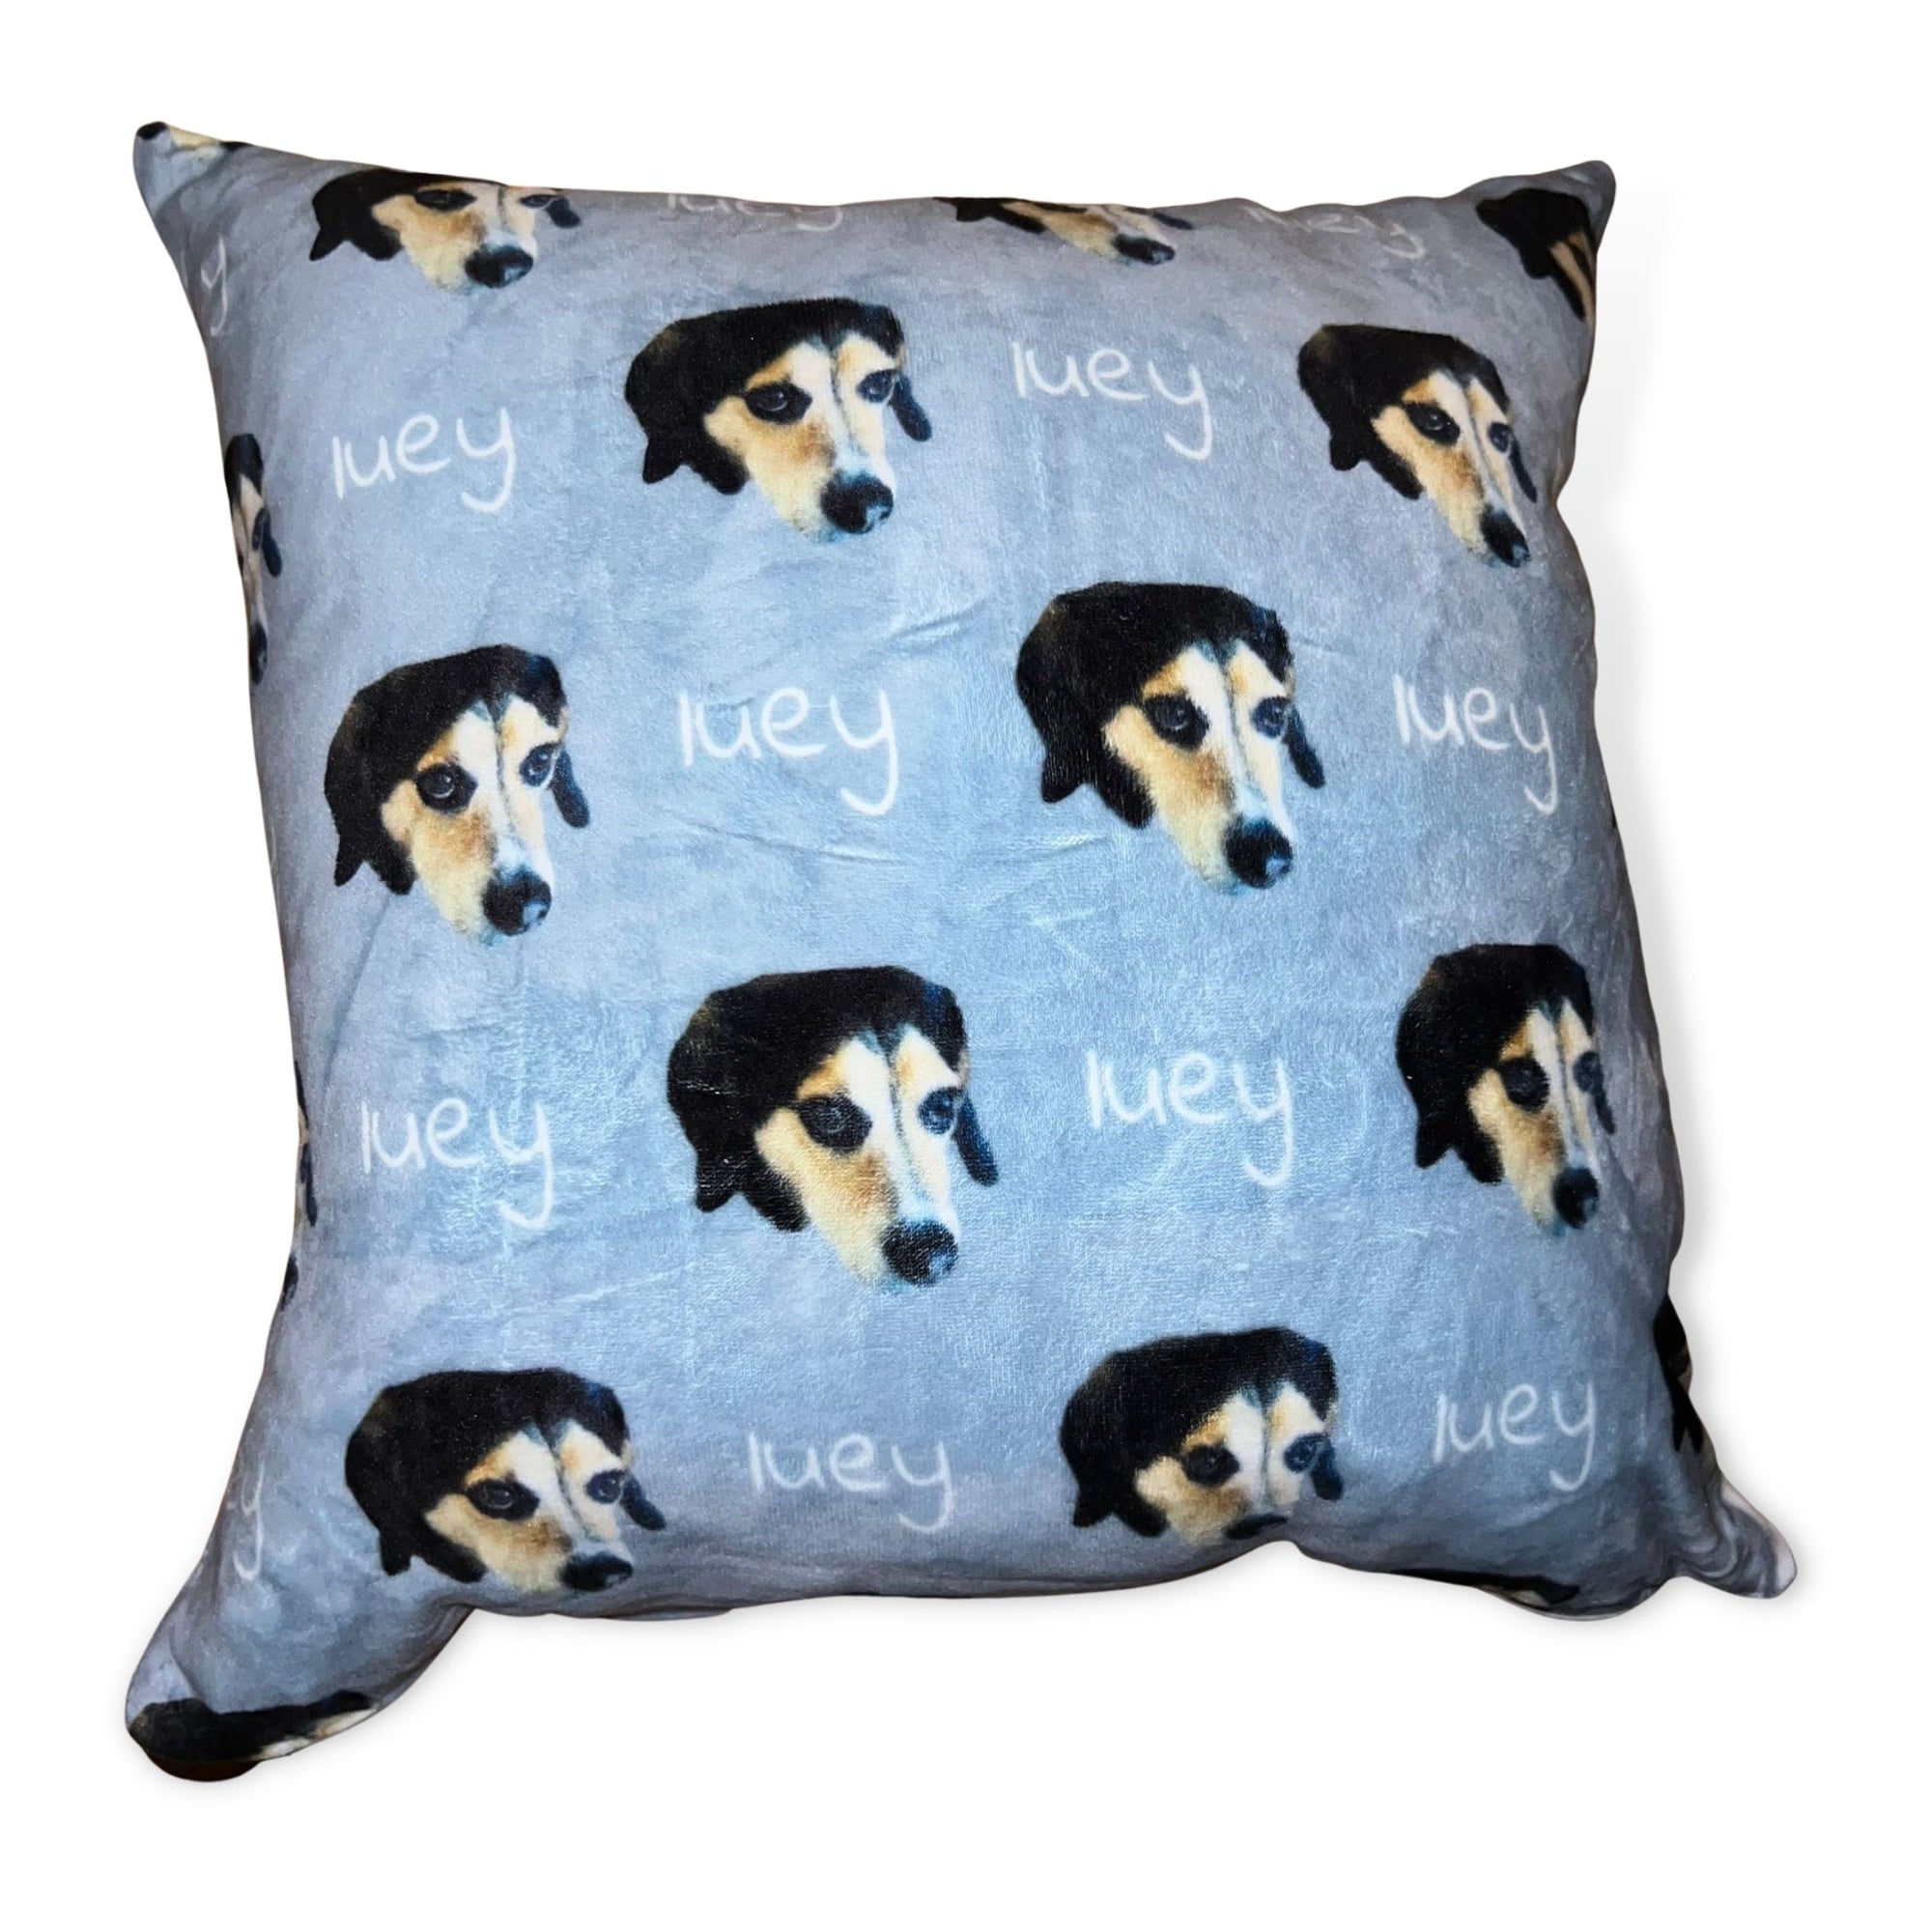 Custom Dog Face Scattered Throw Pillow - a Spirit Animal - $30-$60 a Spirit Animal Animal Prints